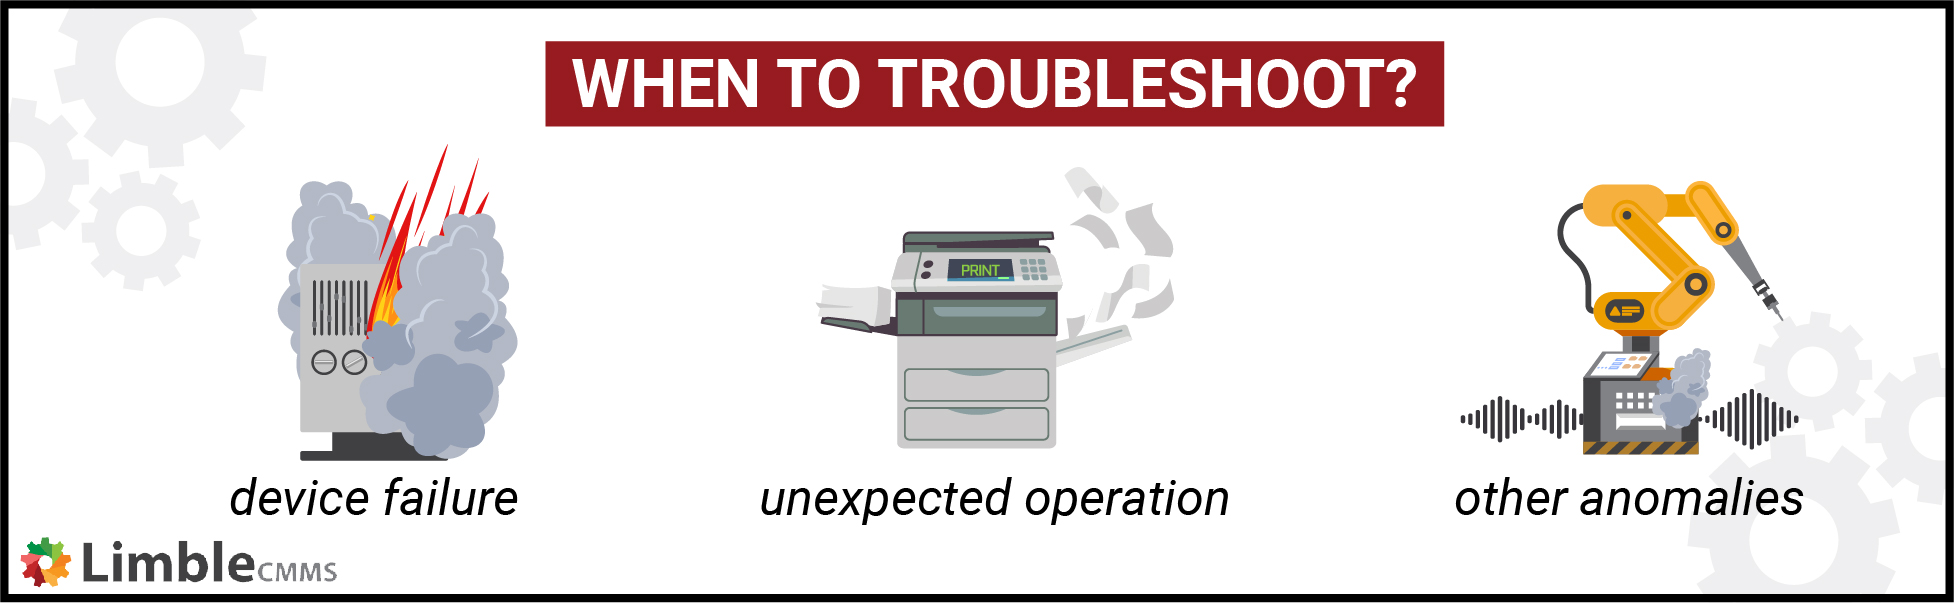 when to troubleshoot